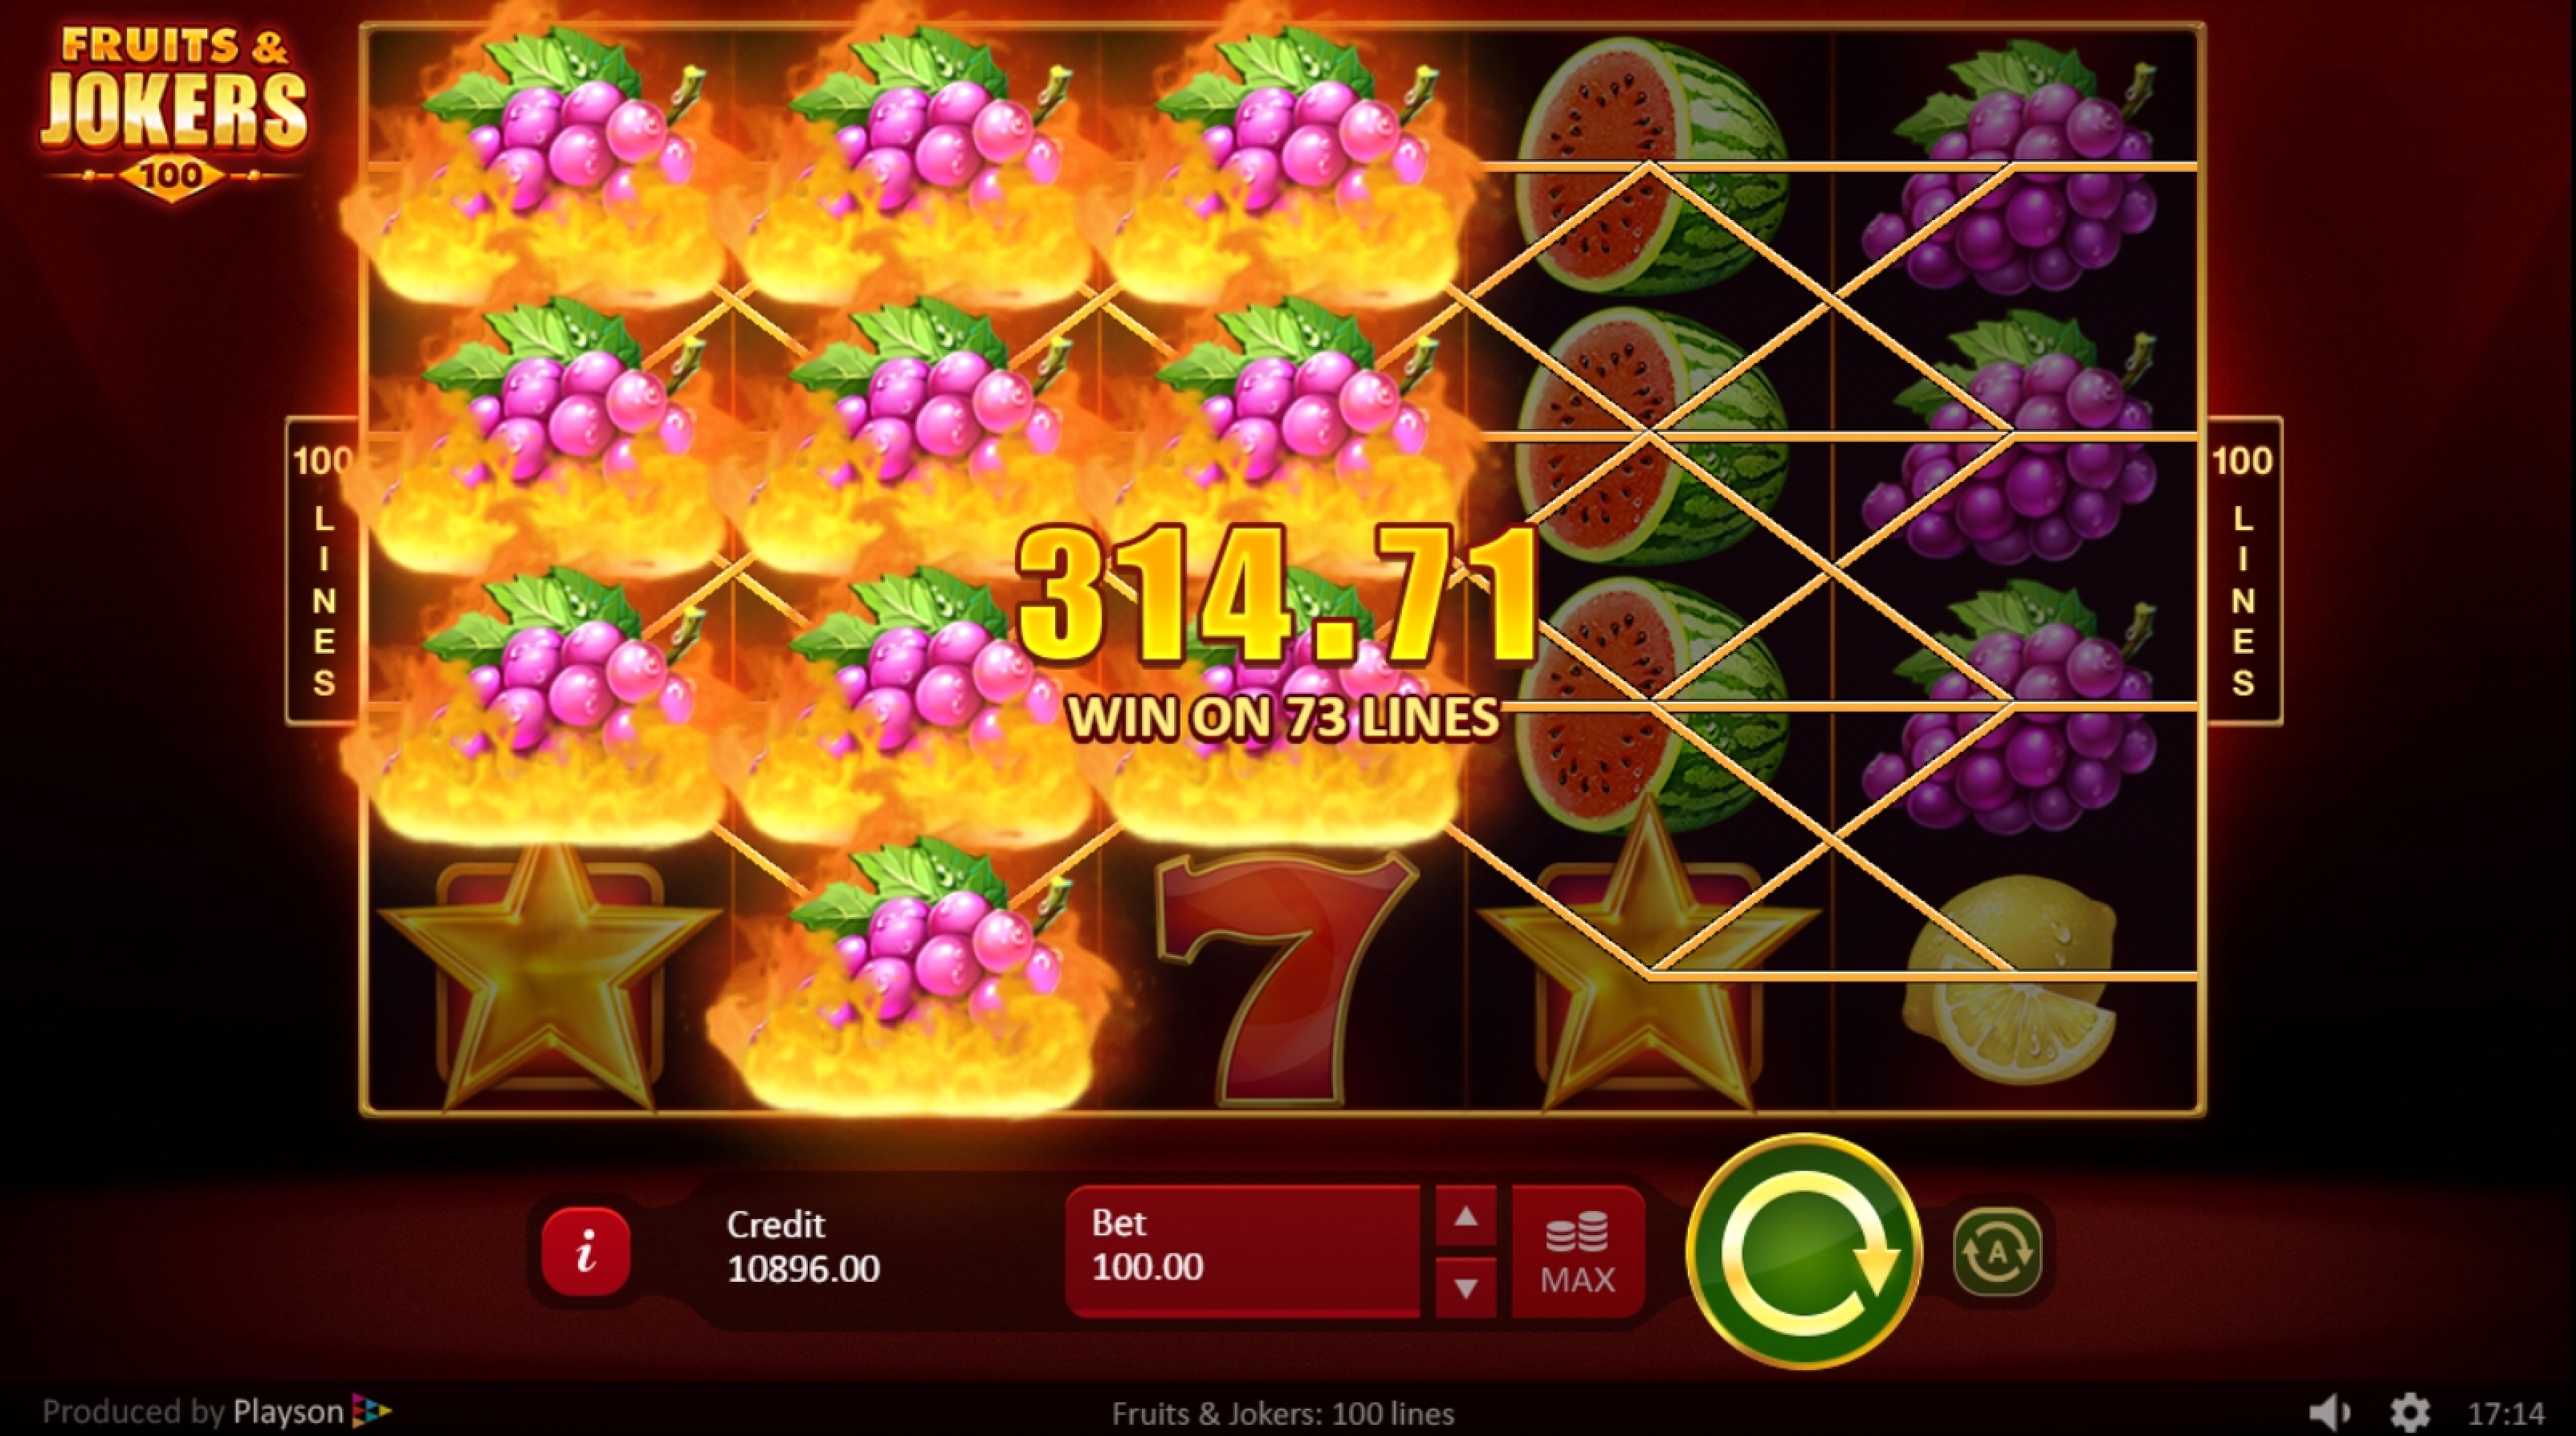 Win Money in Fruits & Jokers: 100 lines Free Slot Game by Playson